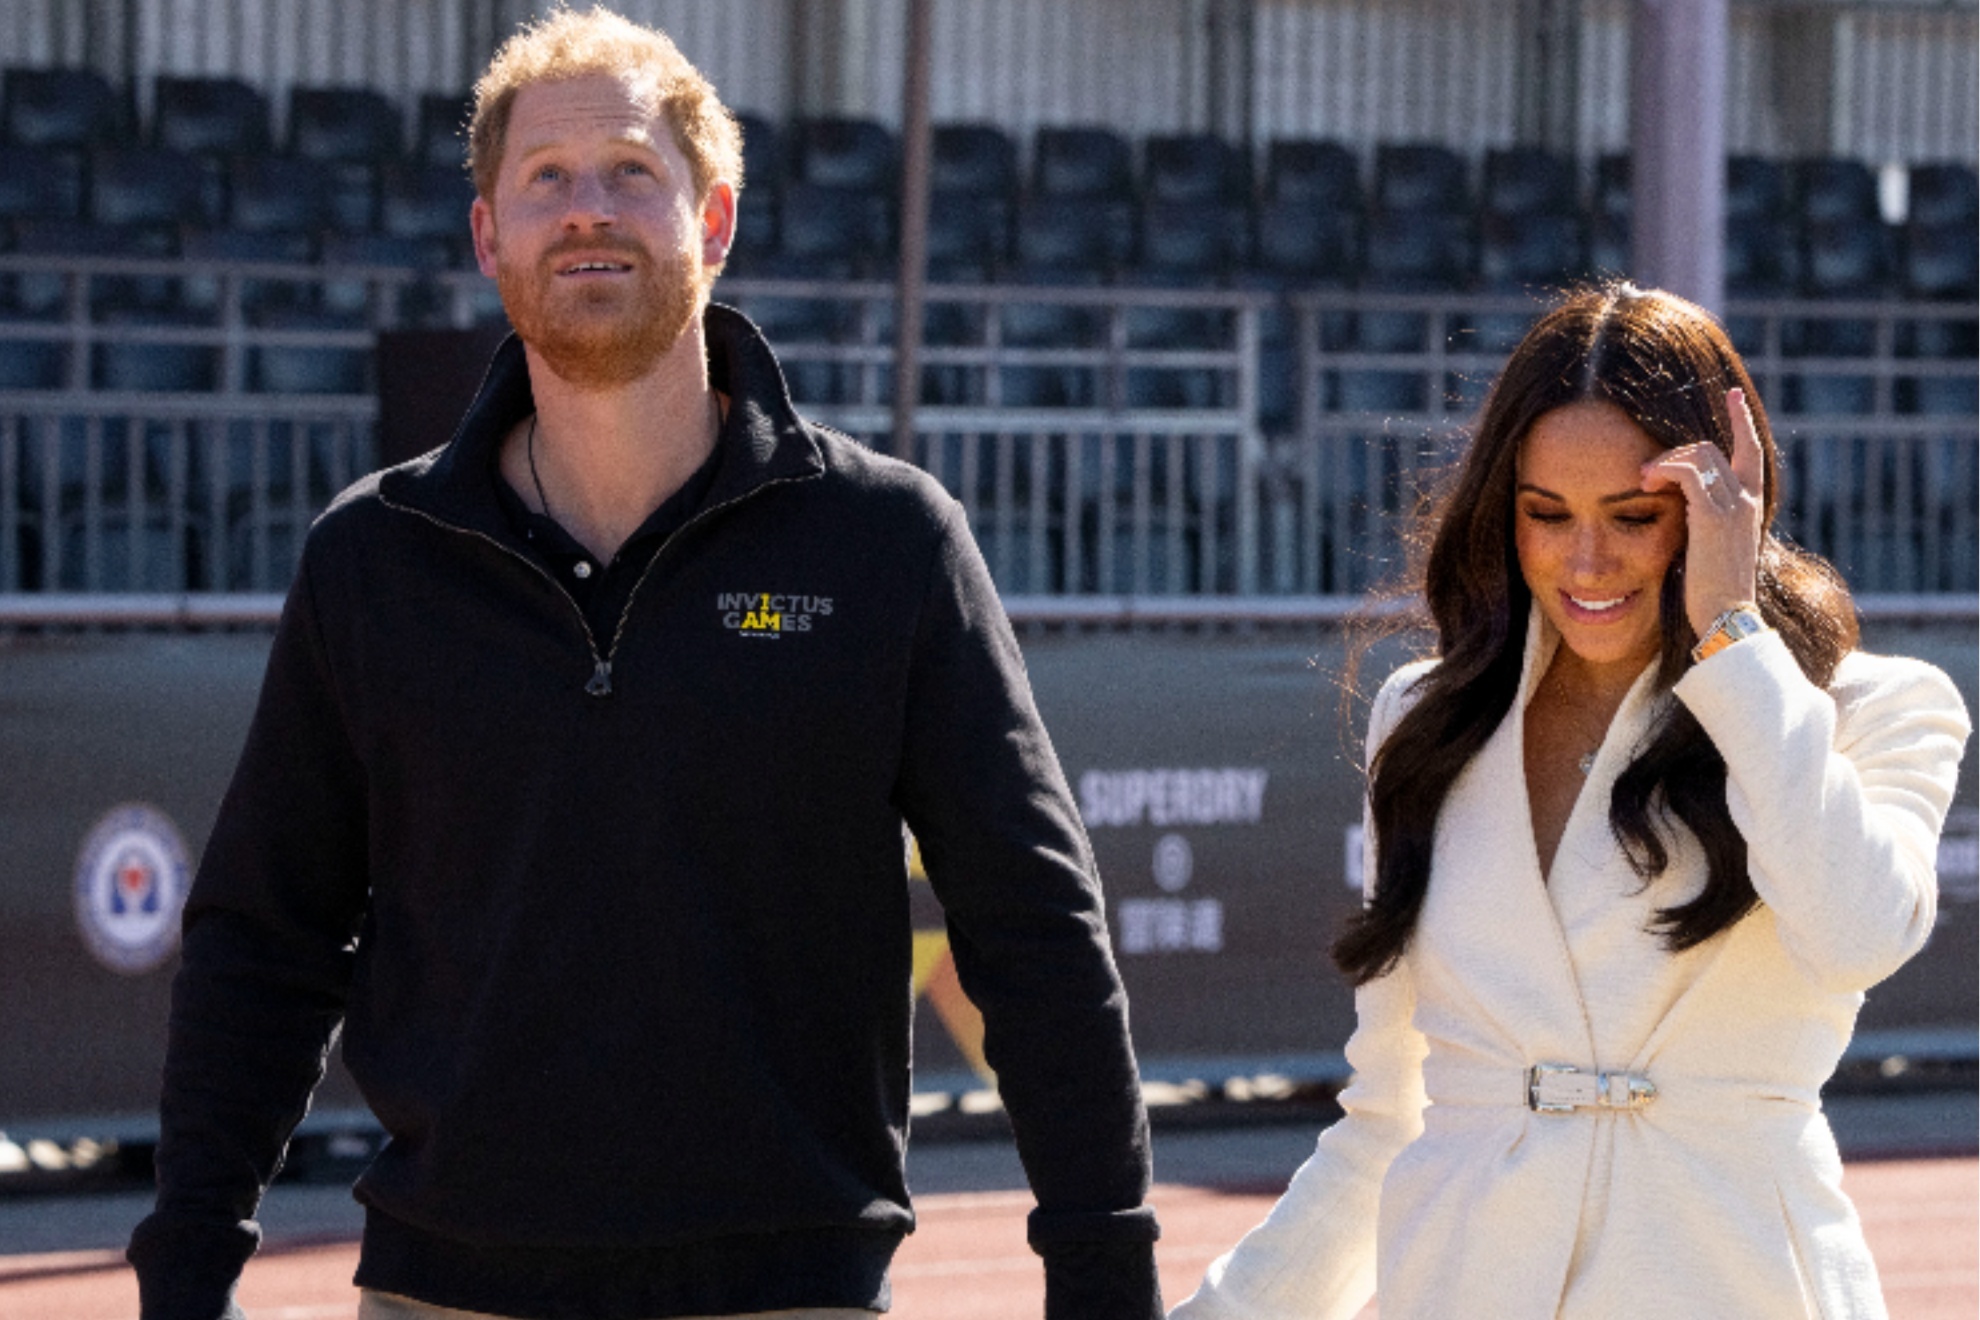 The Duke and Duchess of Sussex, Prince Harry and Meghan Markle.